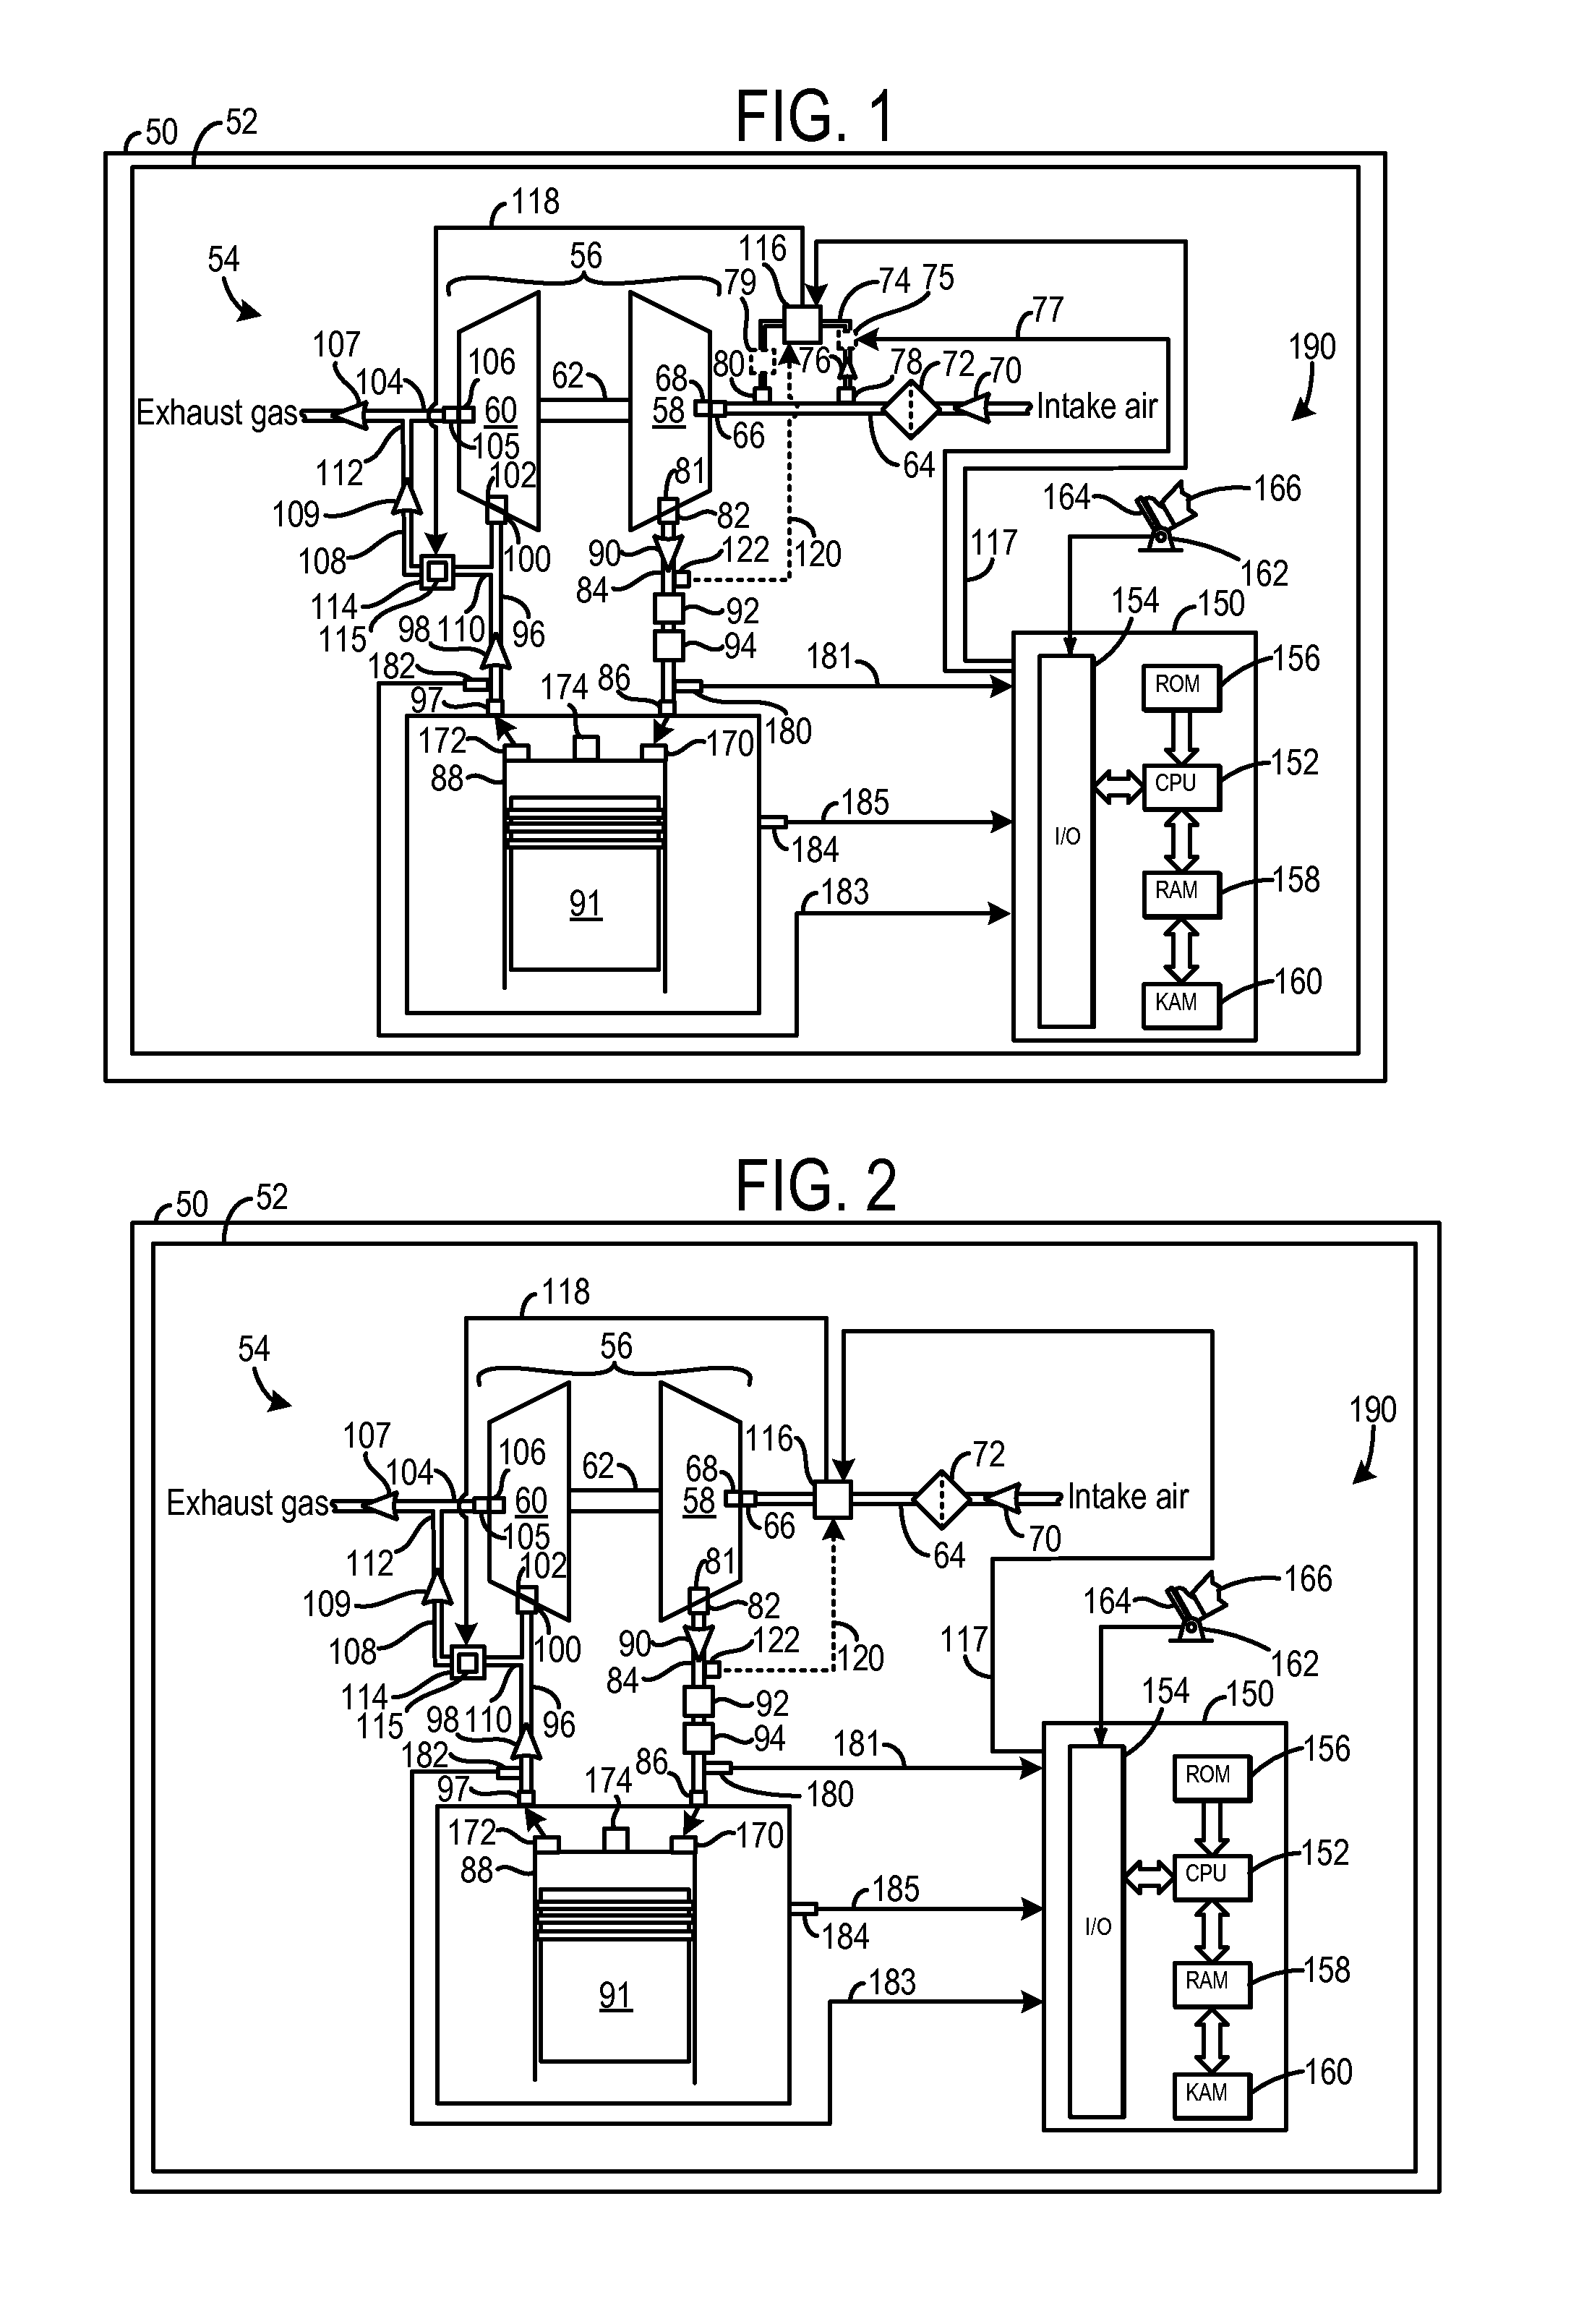 Turbocharger system having an air-cooled solenoid valve